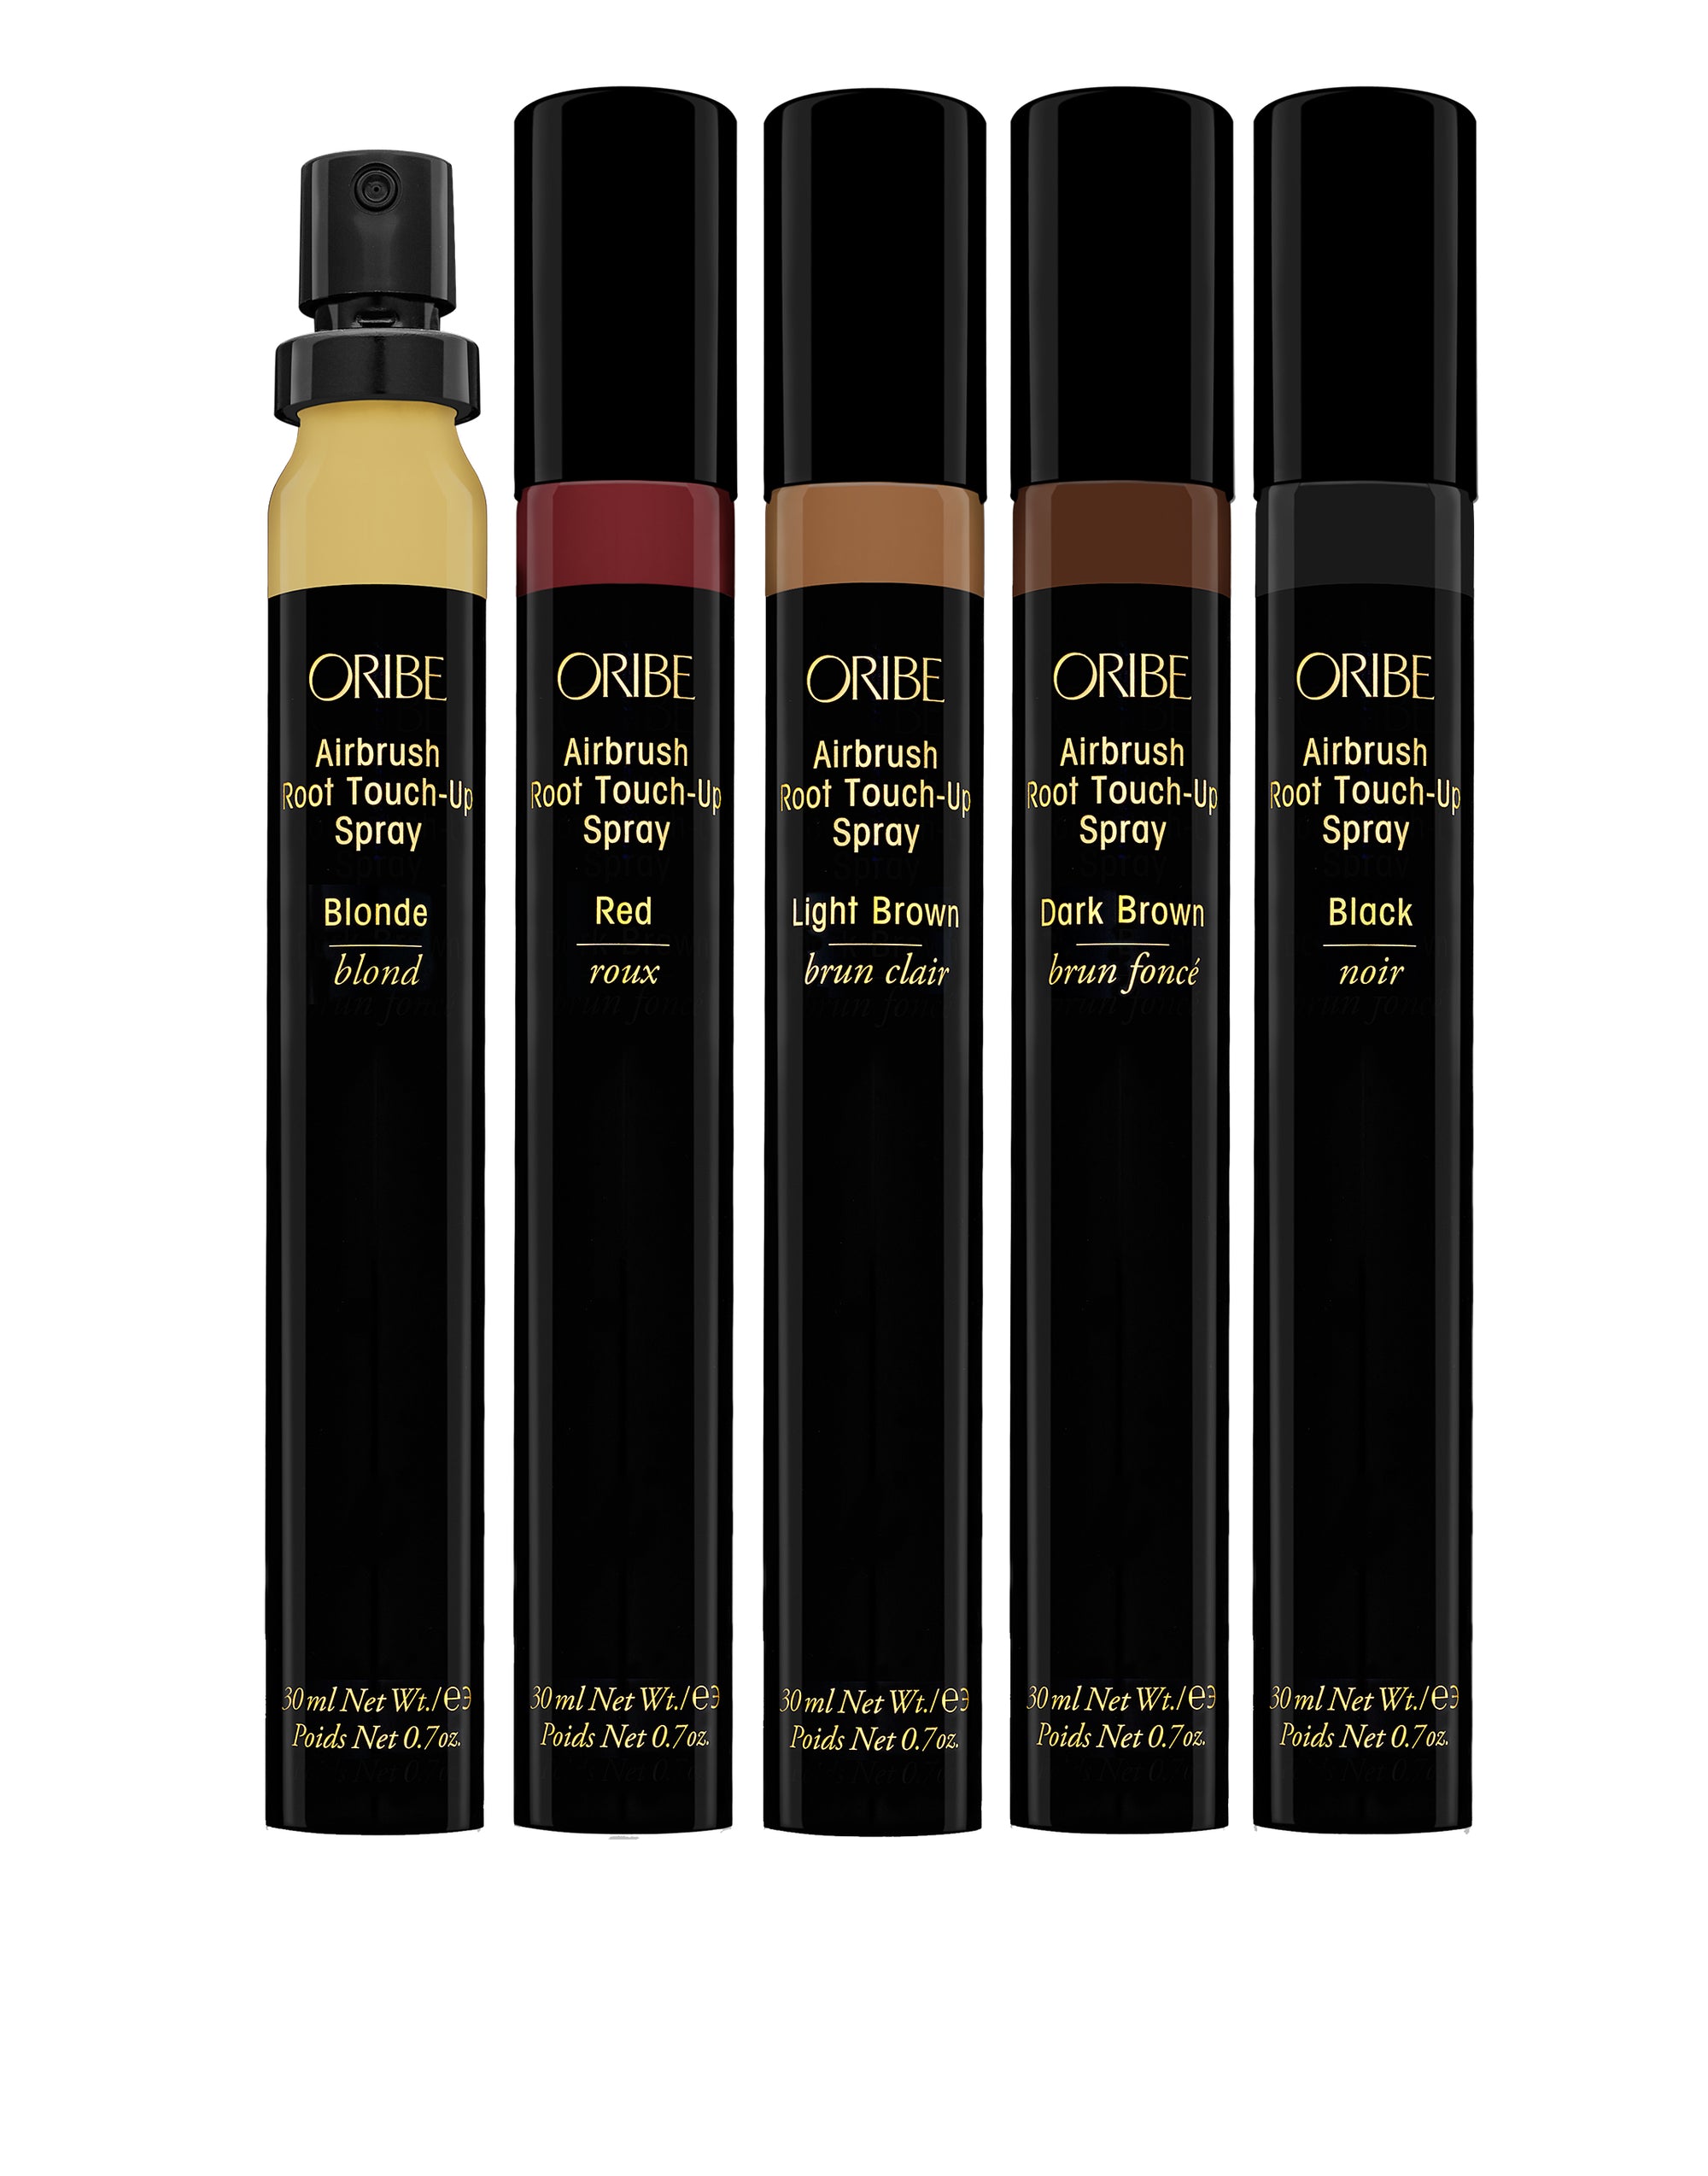 Airbrush Root Touch-Up Spray - Black